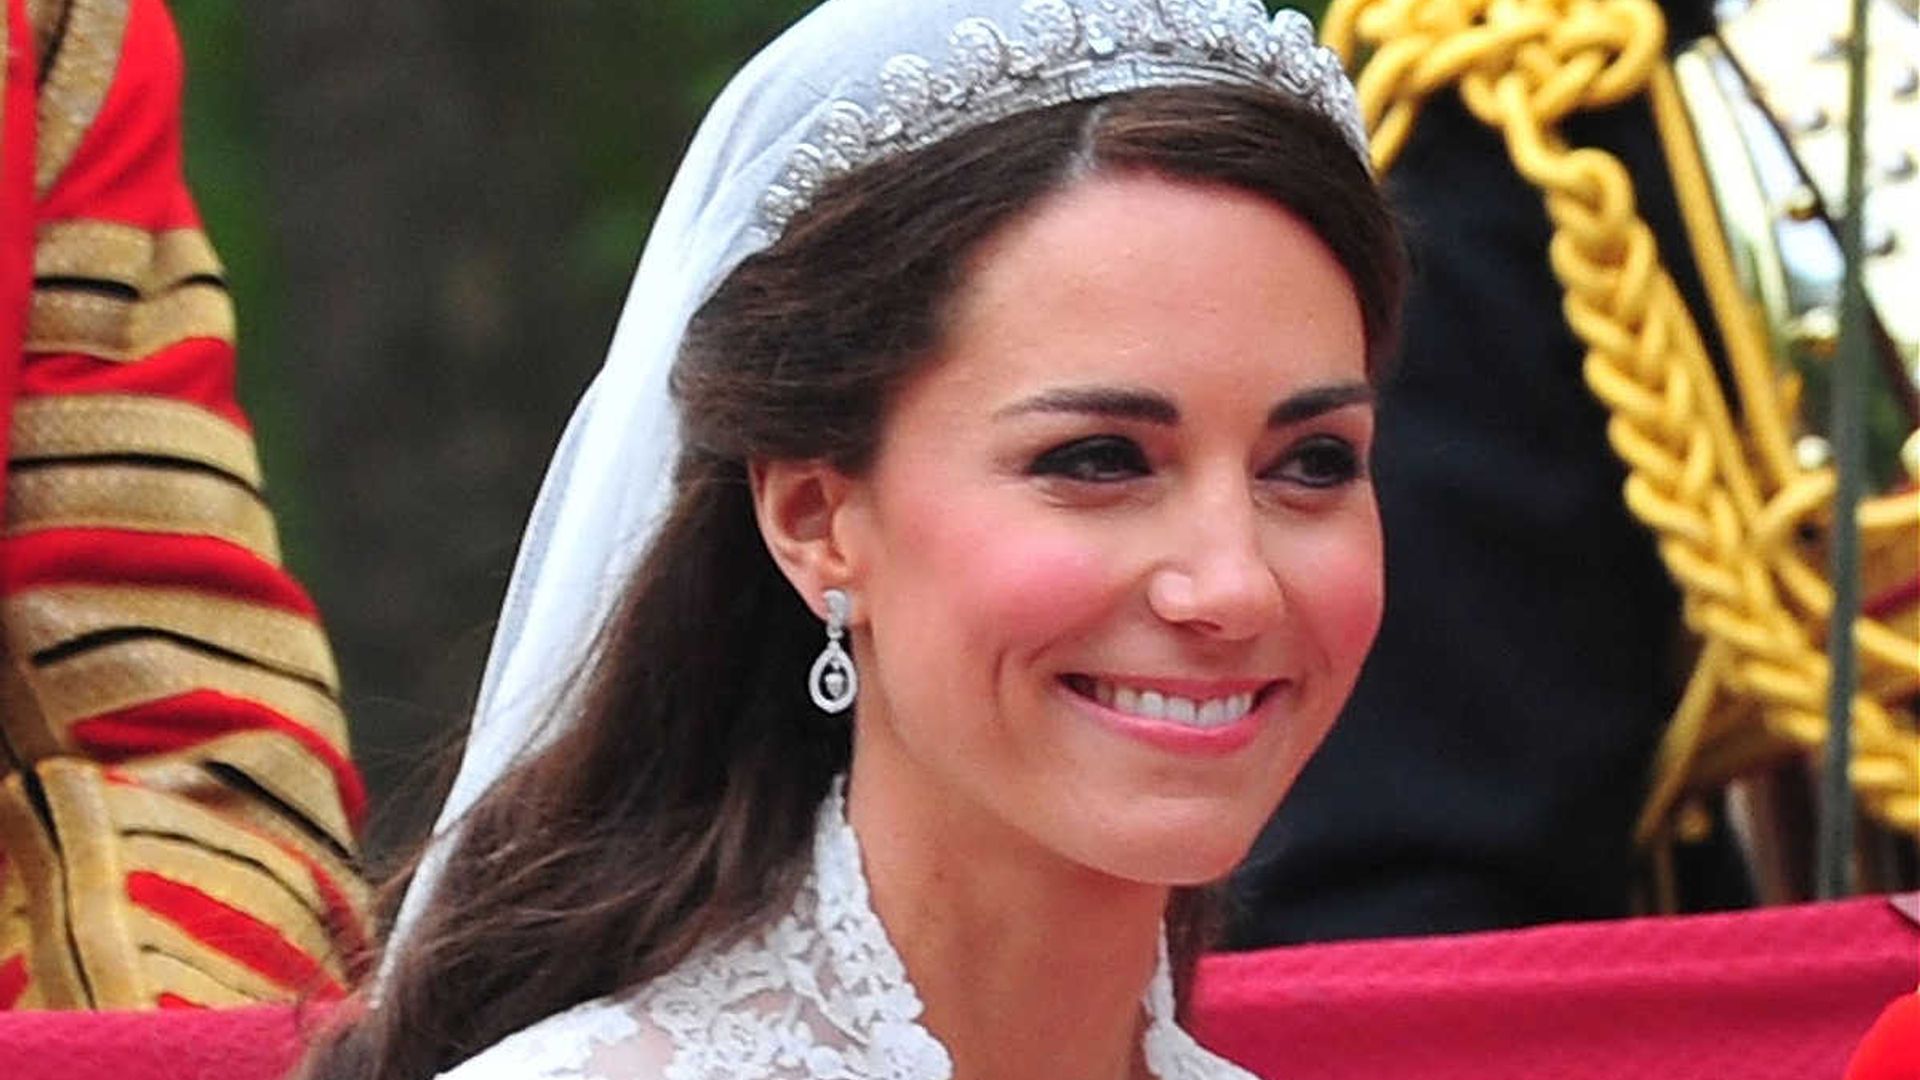 Get Kate Middleton's exact wedding lipstick for just $25 on sale right now